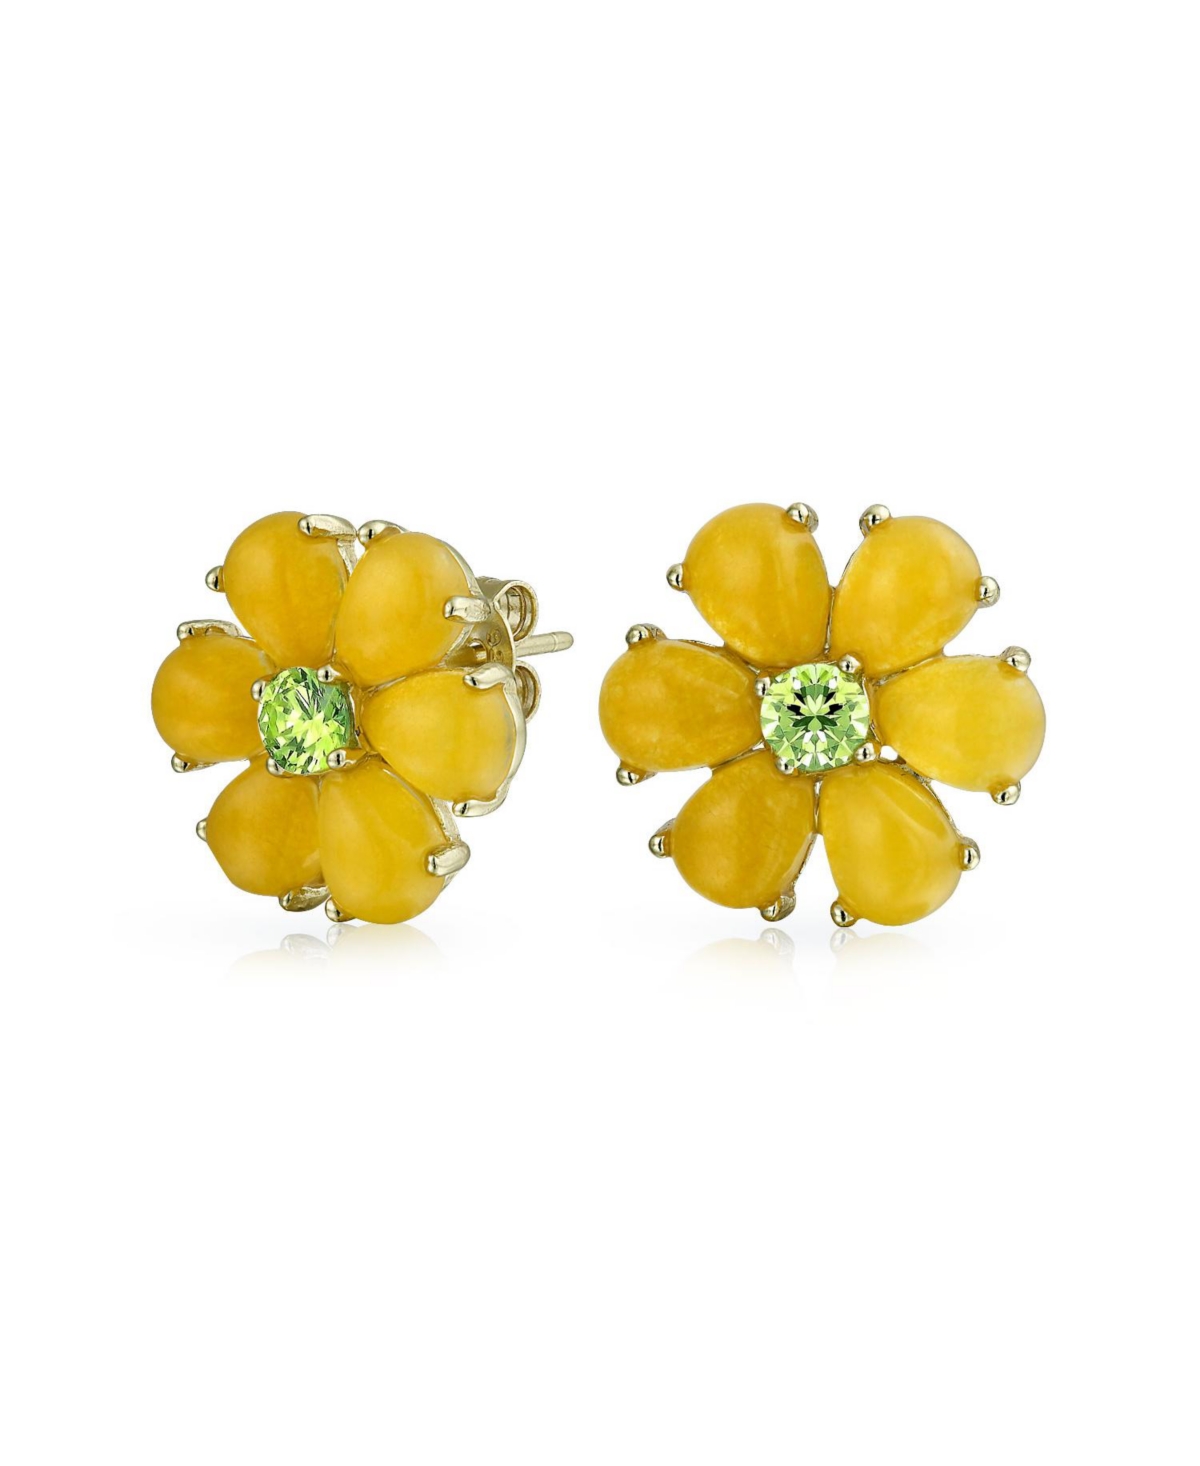 Lemon Yellow Dyed Quartz Garden Flower Stud Earrings: Button-Style with Green Cz, Non-Pierced for Women - 14K Gold-Plated .925 Sterling Silver - Yello